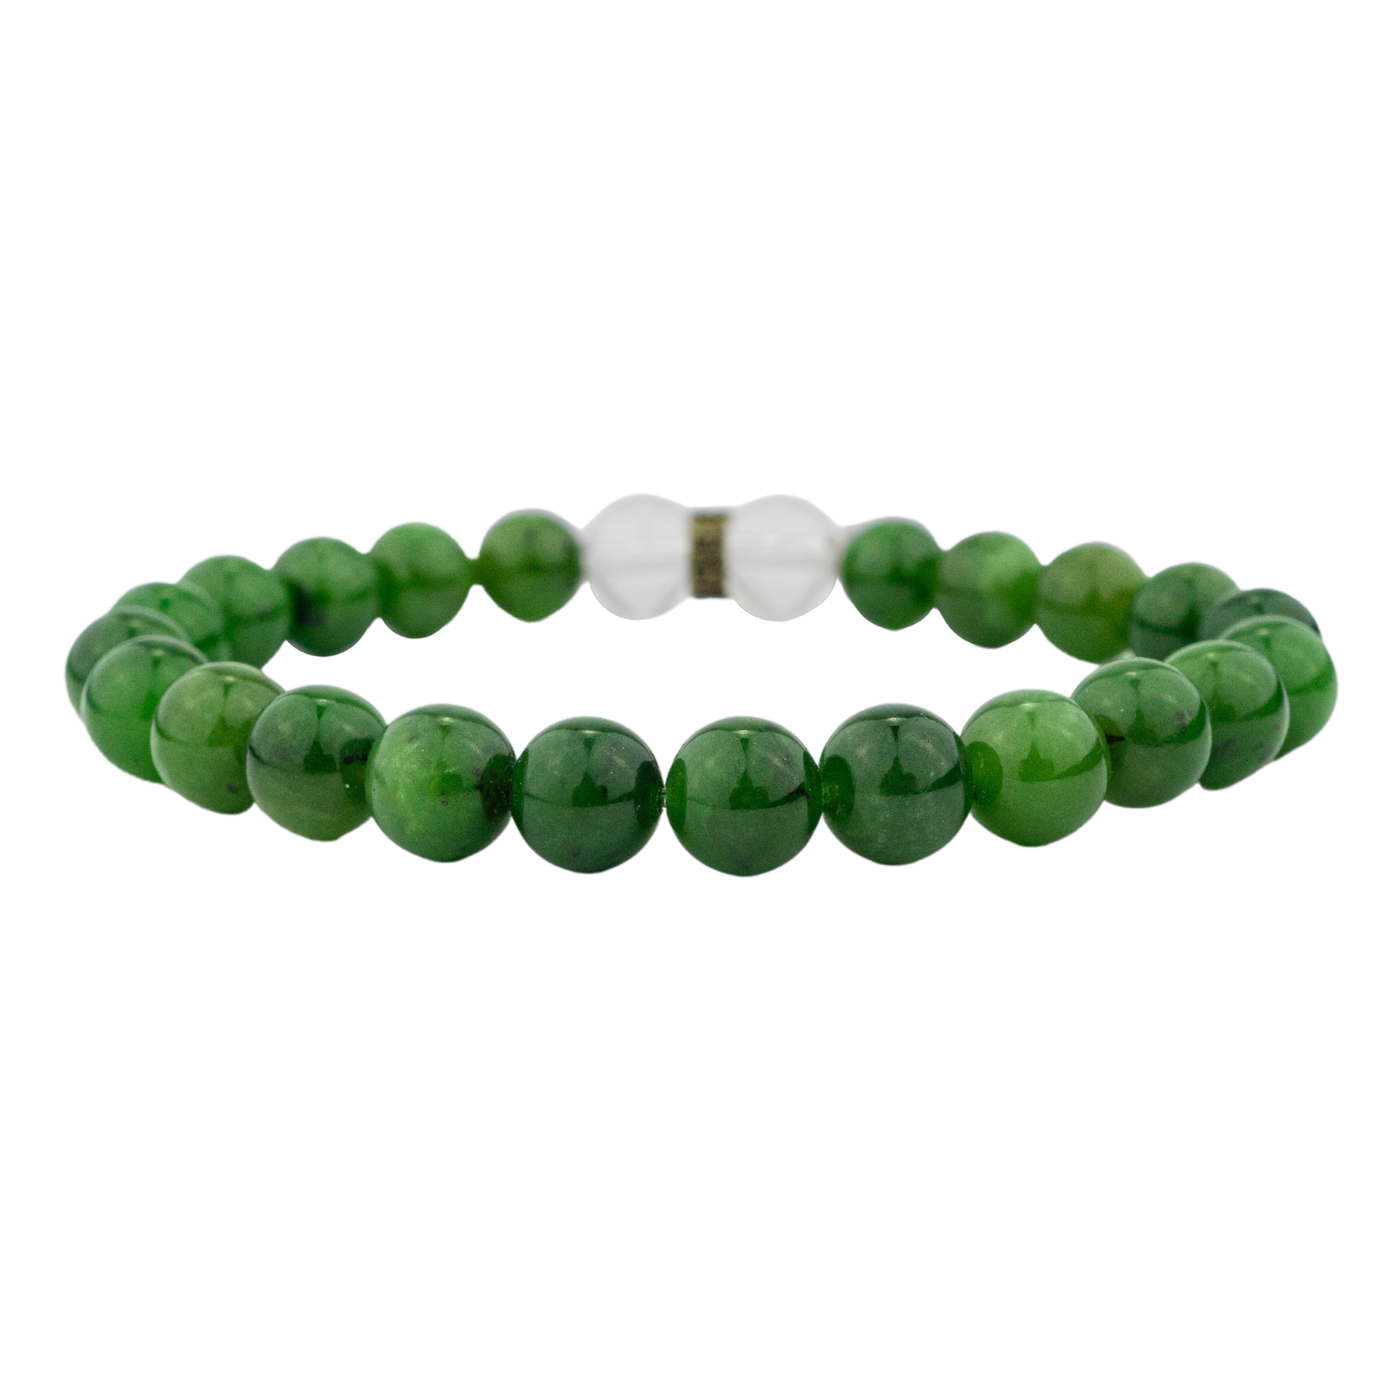 product view of Jade bracelet by Energy Muse